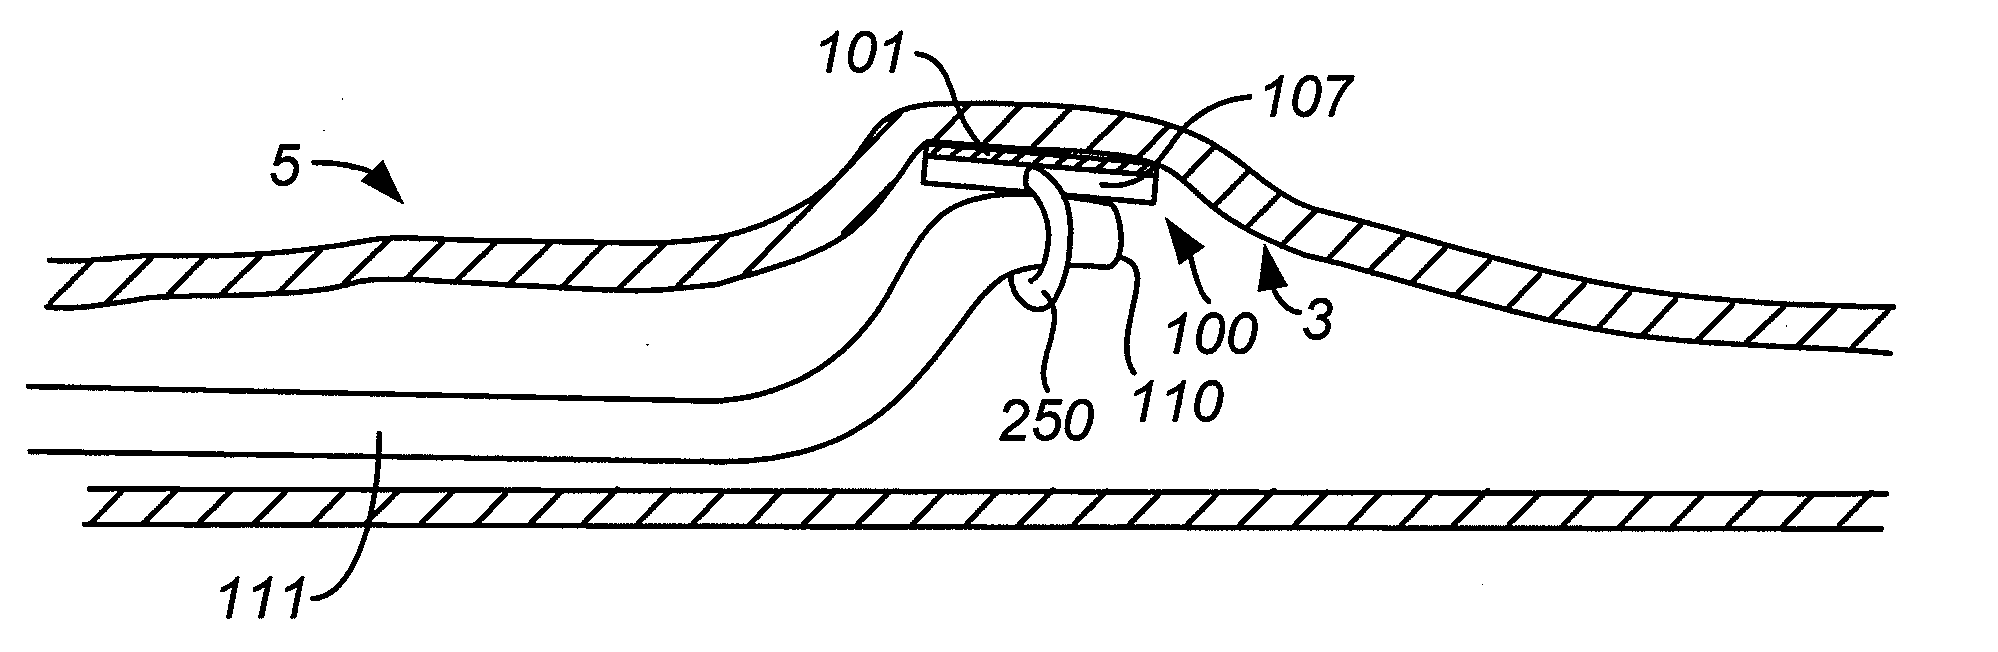 Method and Apparatus for Gastrointestinal Tract Ablation to Achieve Loss of Persistent and/or Recurrent Excess Body Weight Following a Weight-Loss Operation